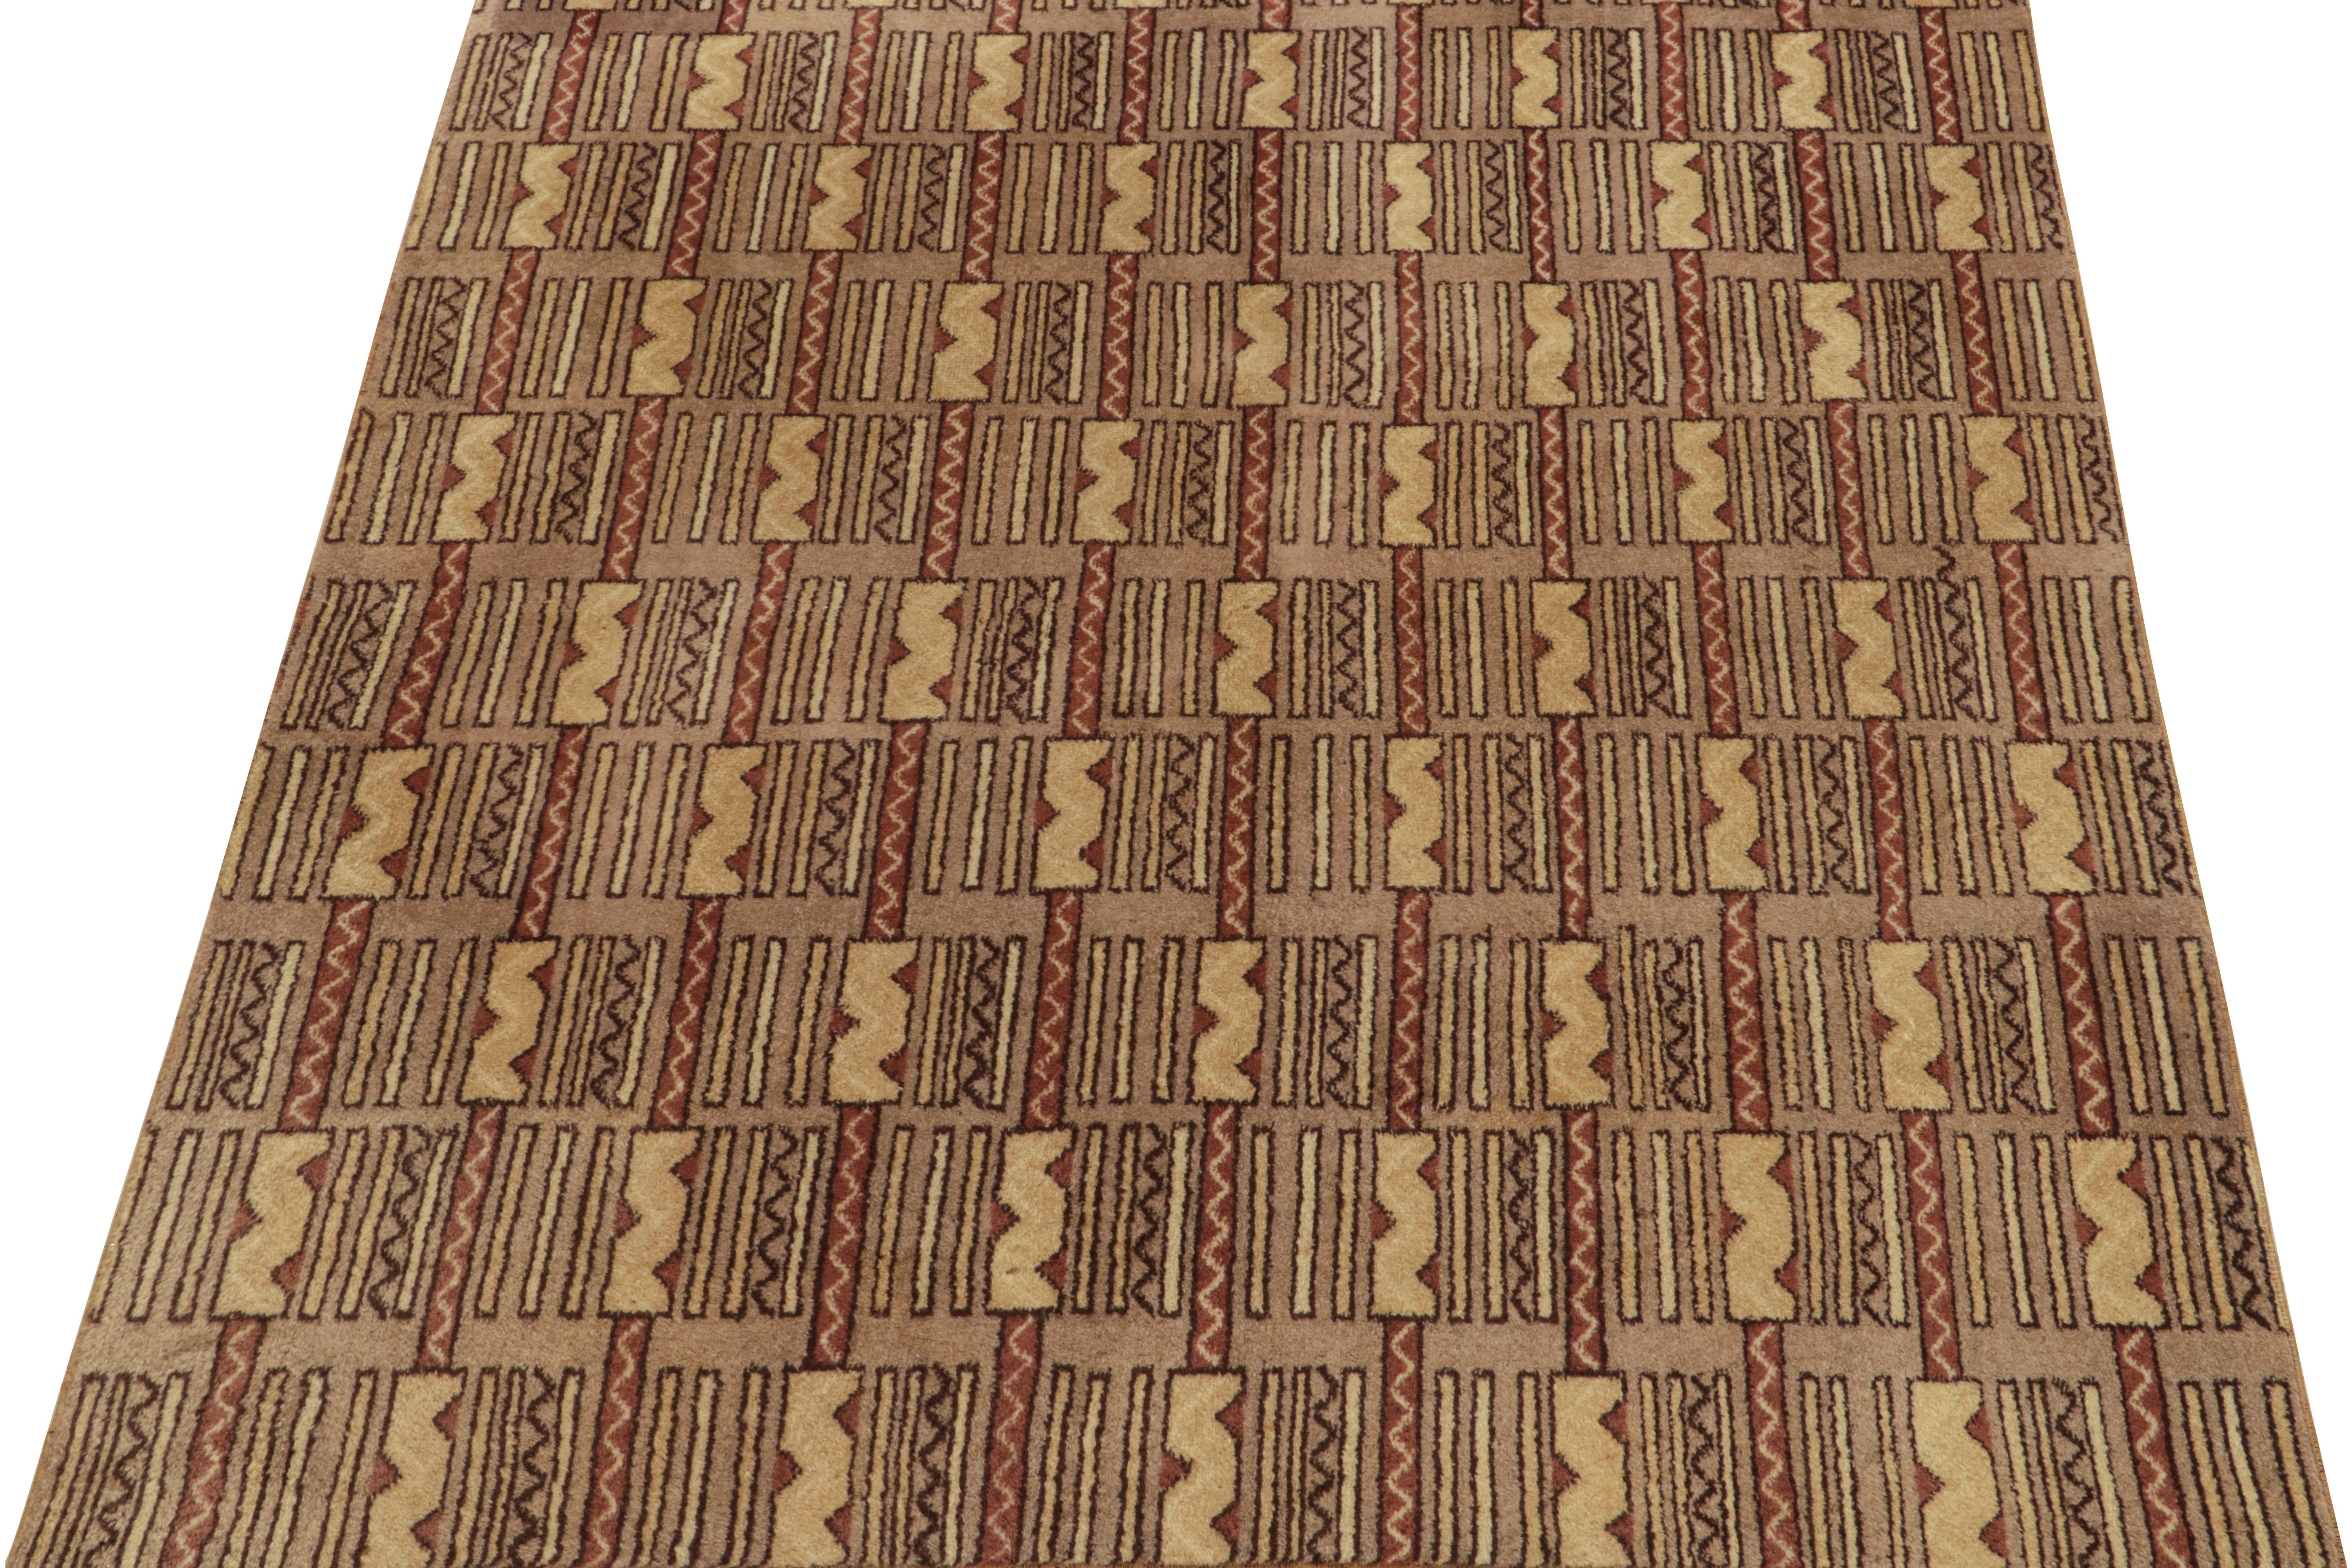 Art Deco 1960s Vintage Deco Rug in Beige-Brown and Red Geometric Pattern by Rug & Kilim For Sale